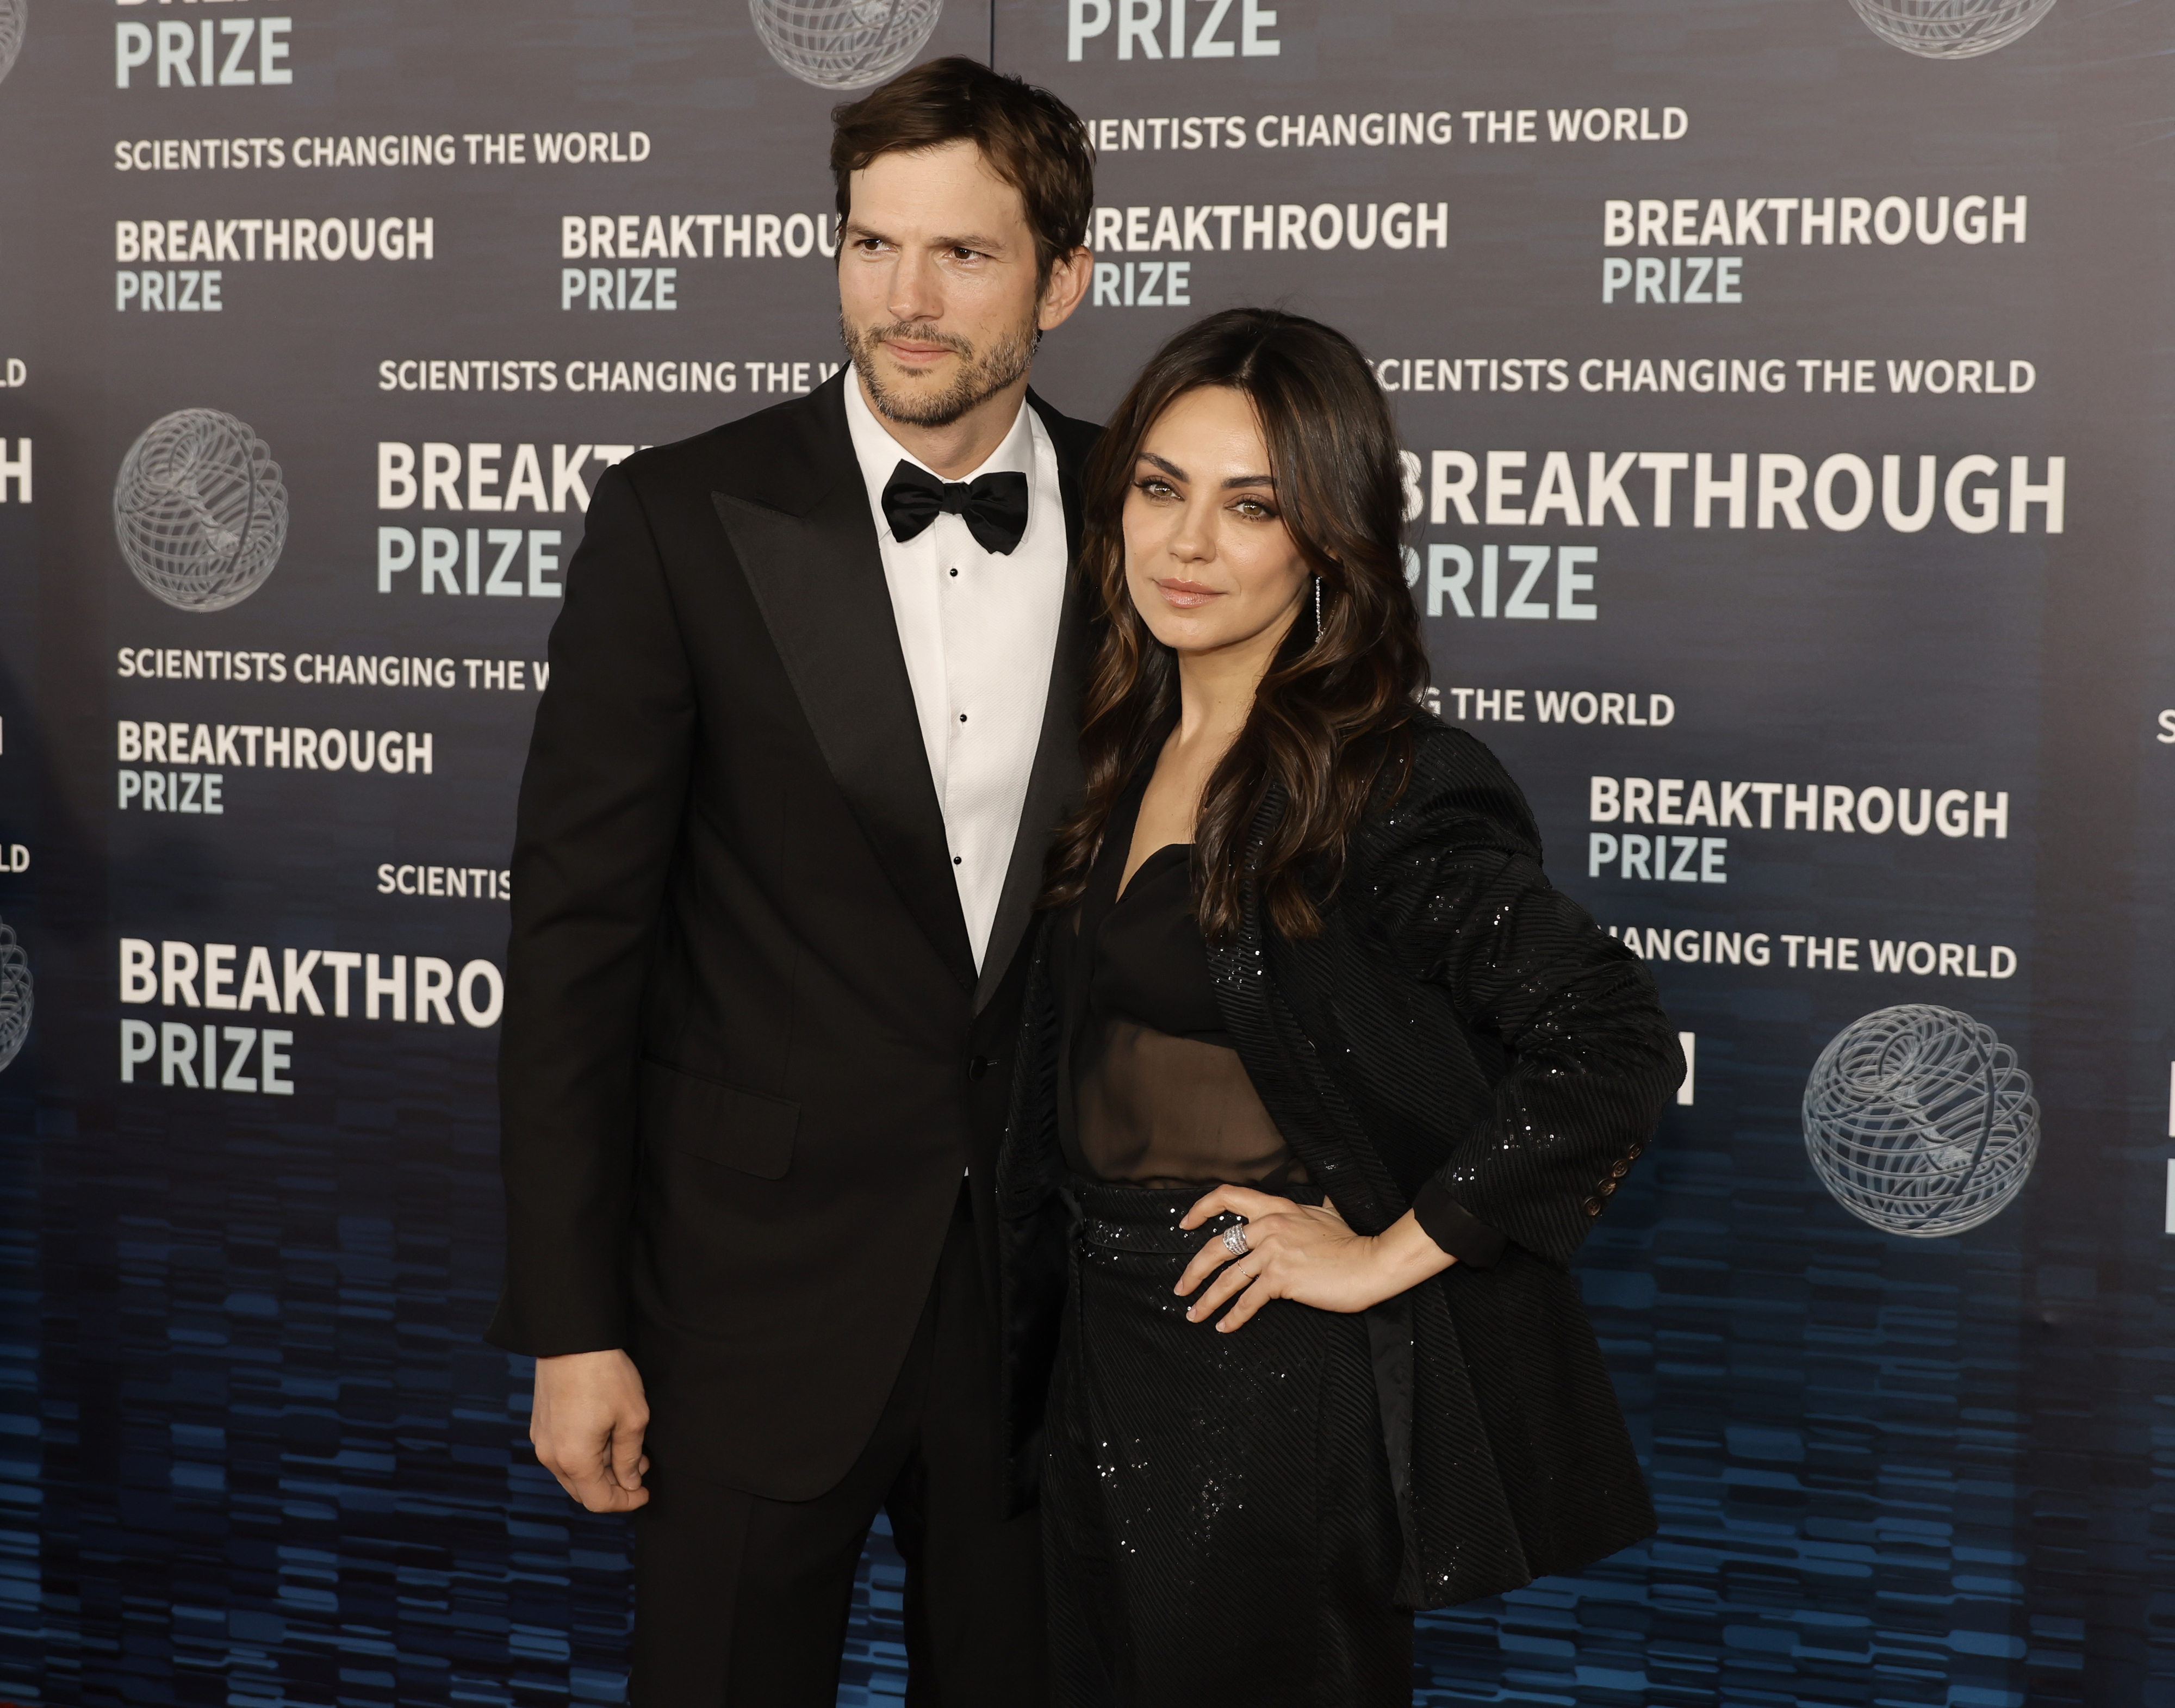 Ashton Kutcher and Mila Kunis posing together at the Breakthrough Prize event